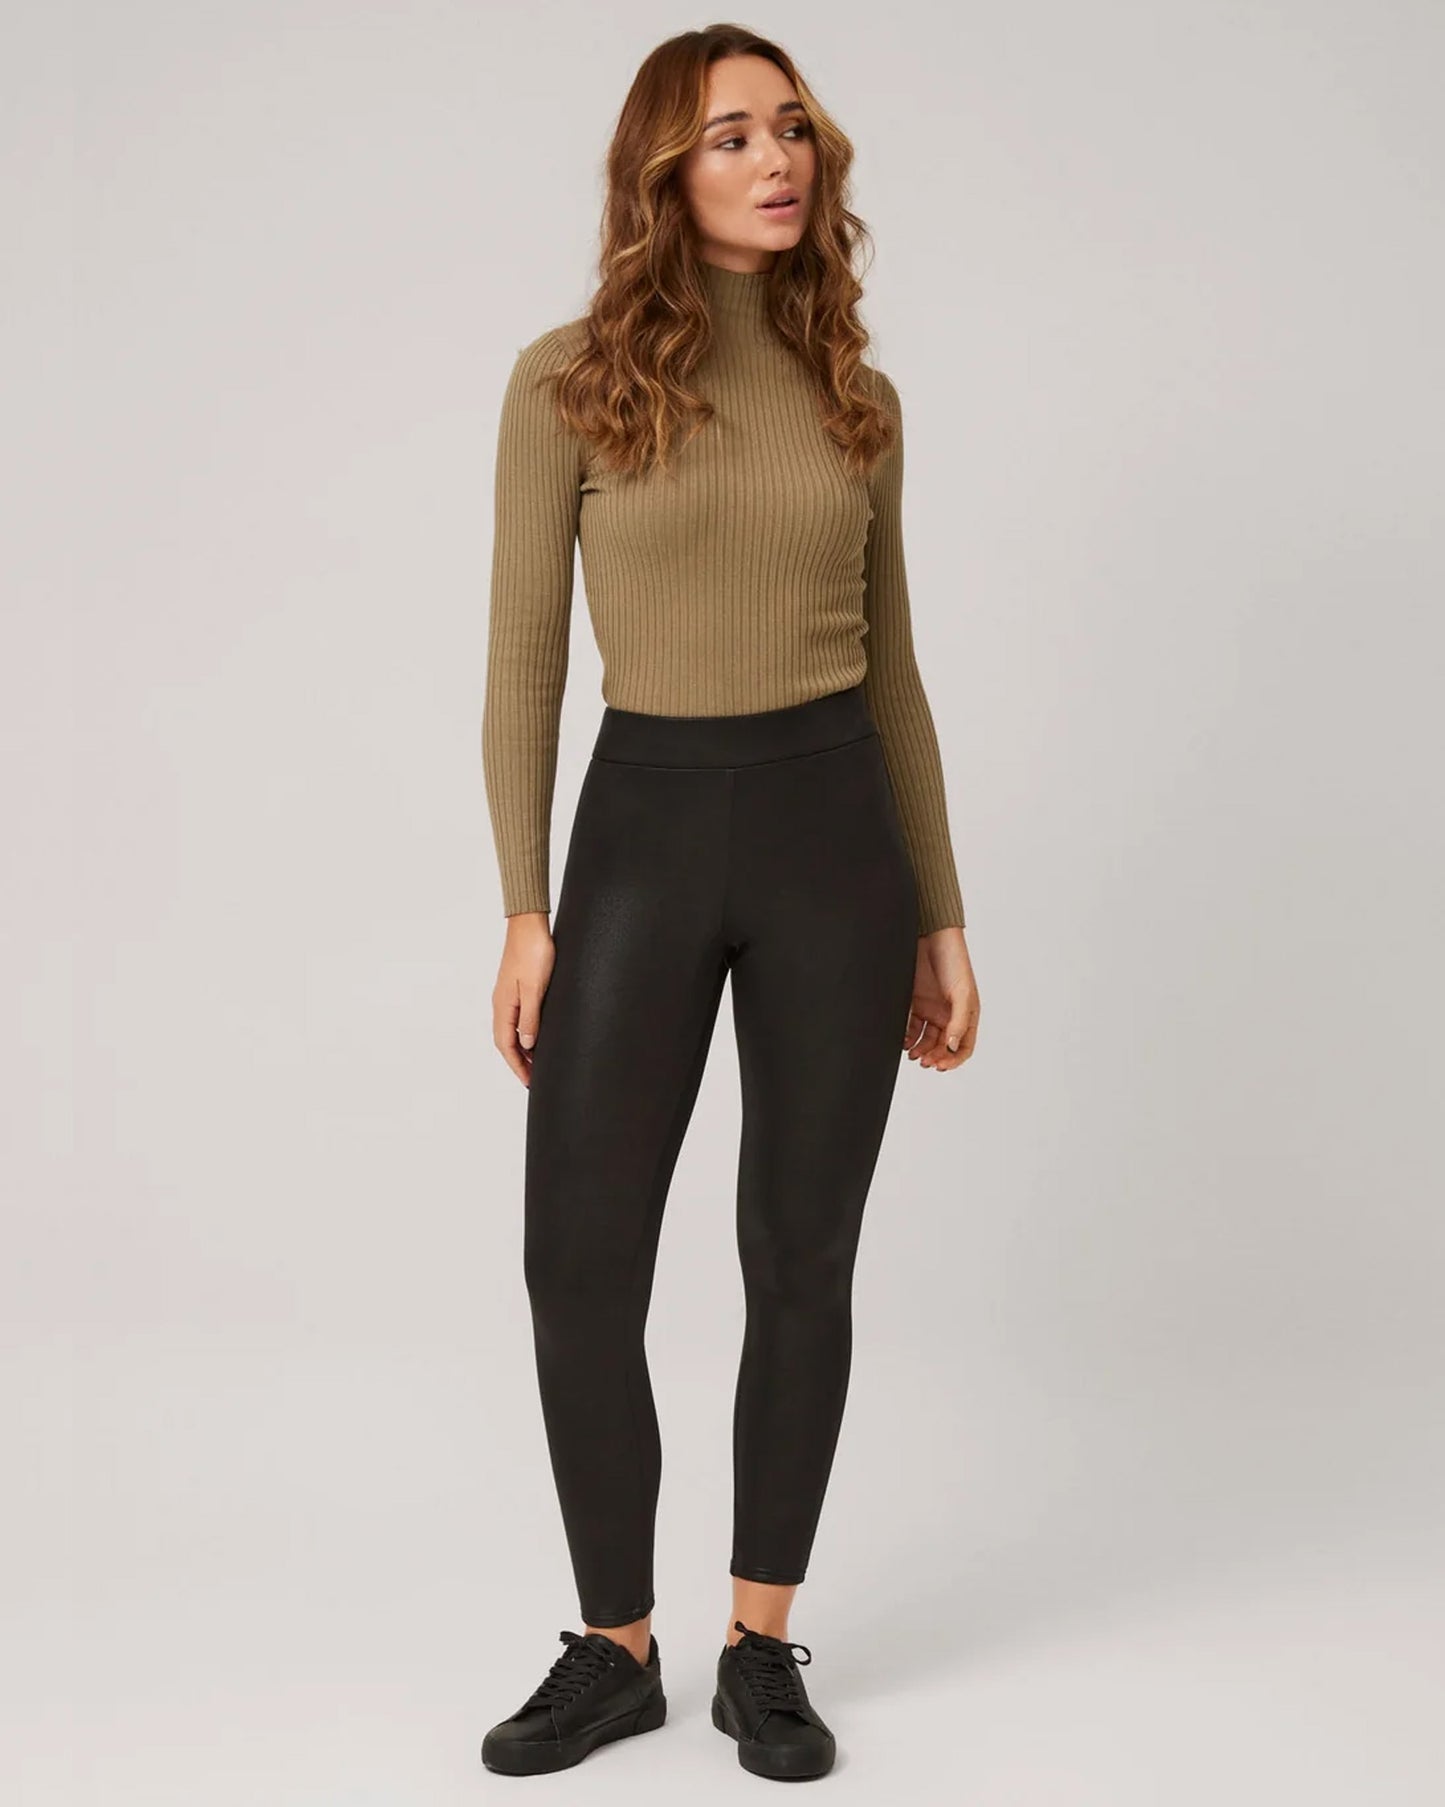 Ysabel Mora 70293 Waxed Thermal Leggings - Woman wearing a beige ribbed turtle neck top, tucked into black high waisted thermal trouser leggings with waxed effect print and black sneakers.